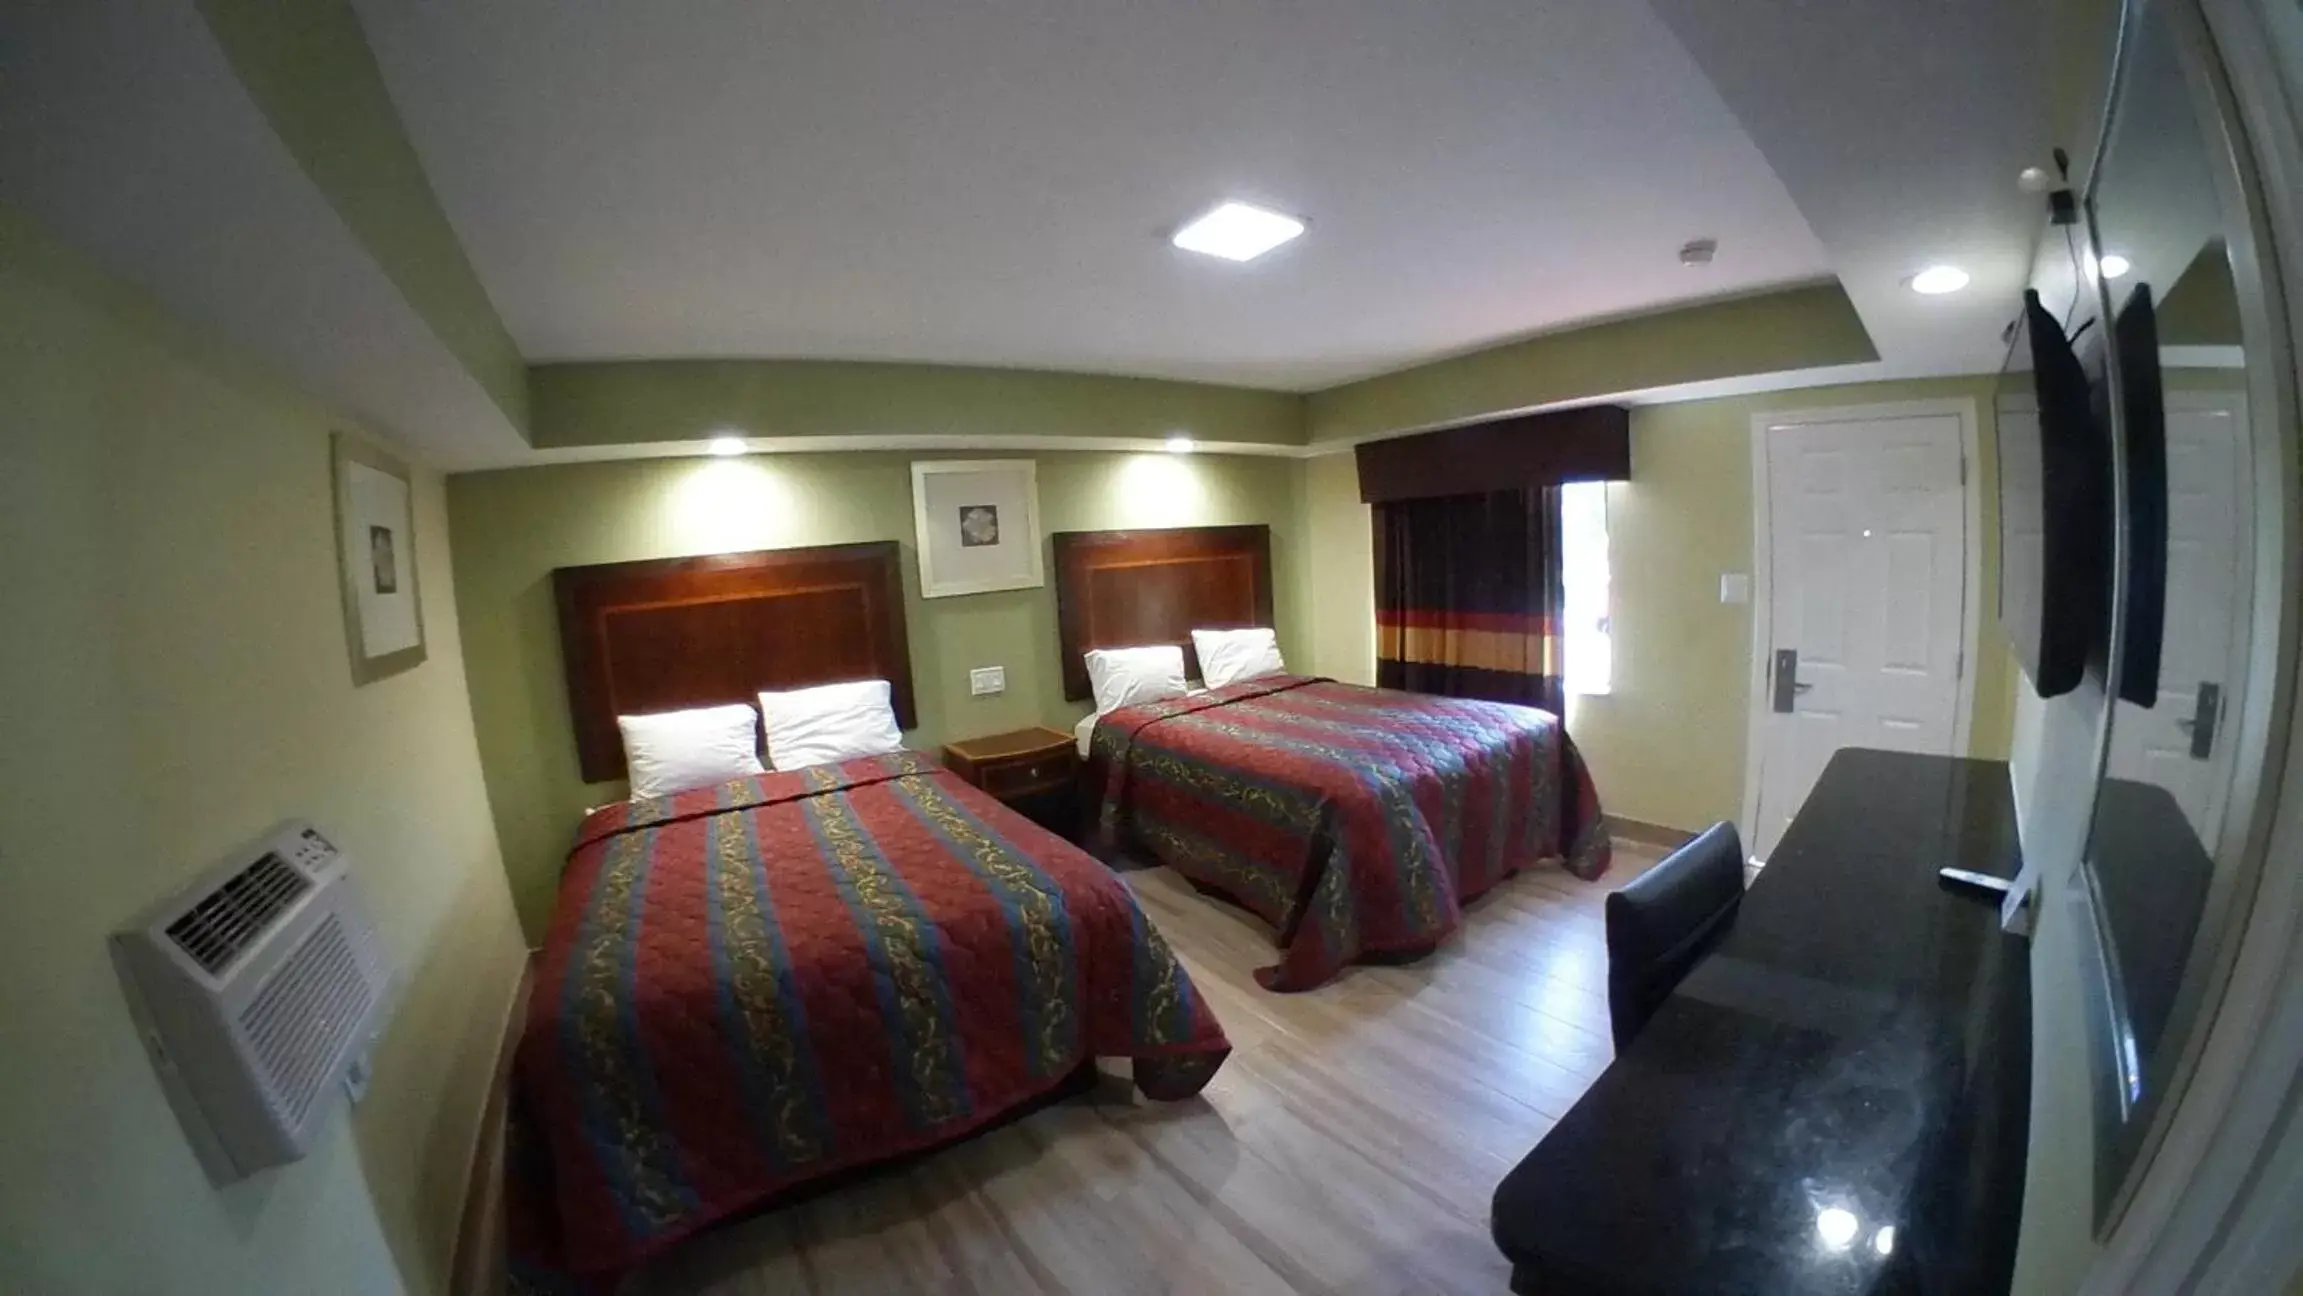 Standard Queen Room with Two Queen Beds in Travel Inn of Riviera Beach